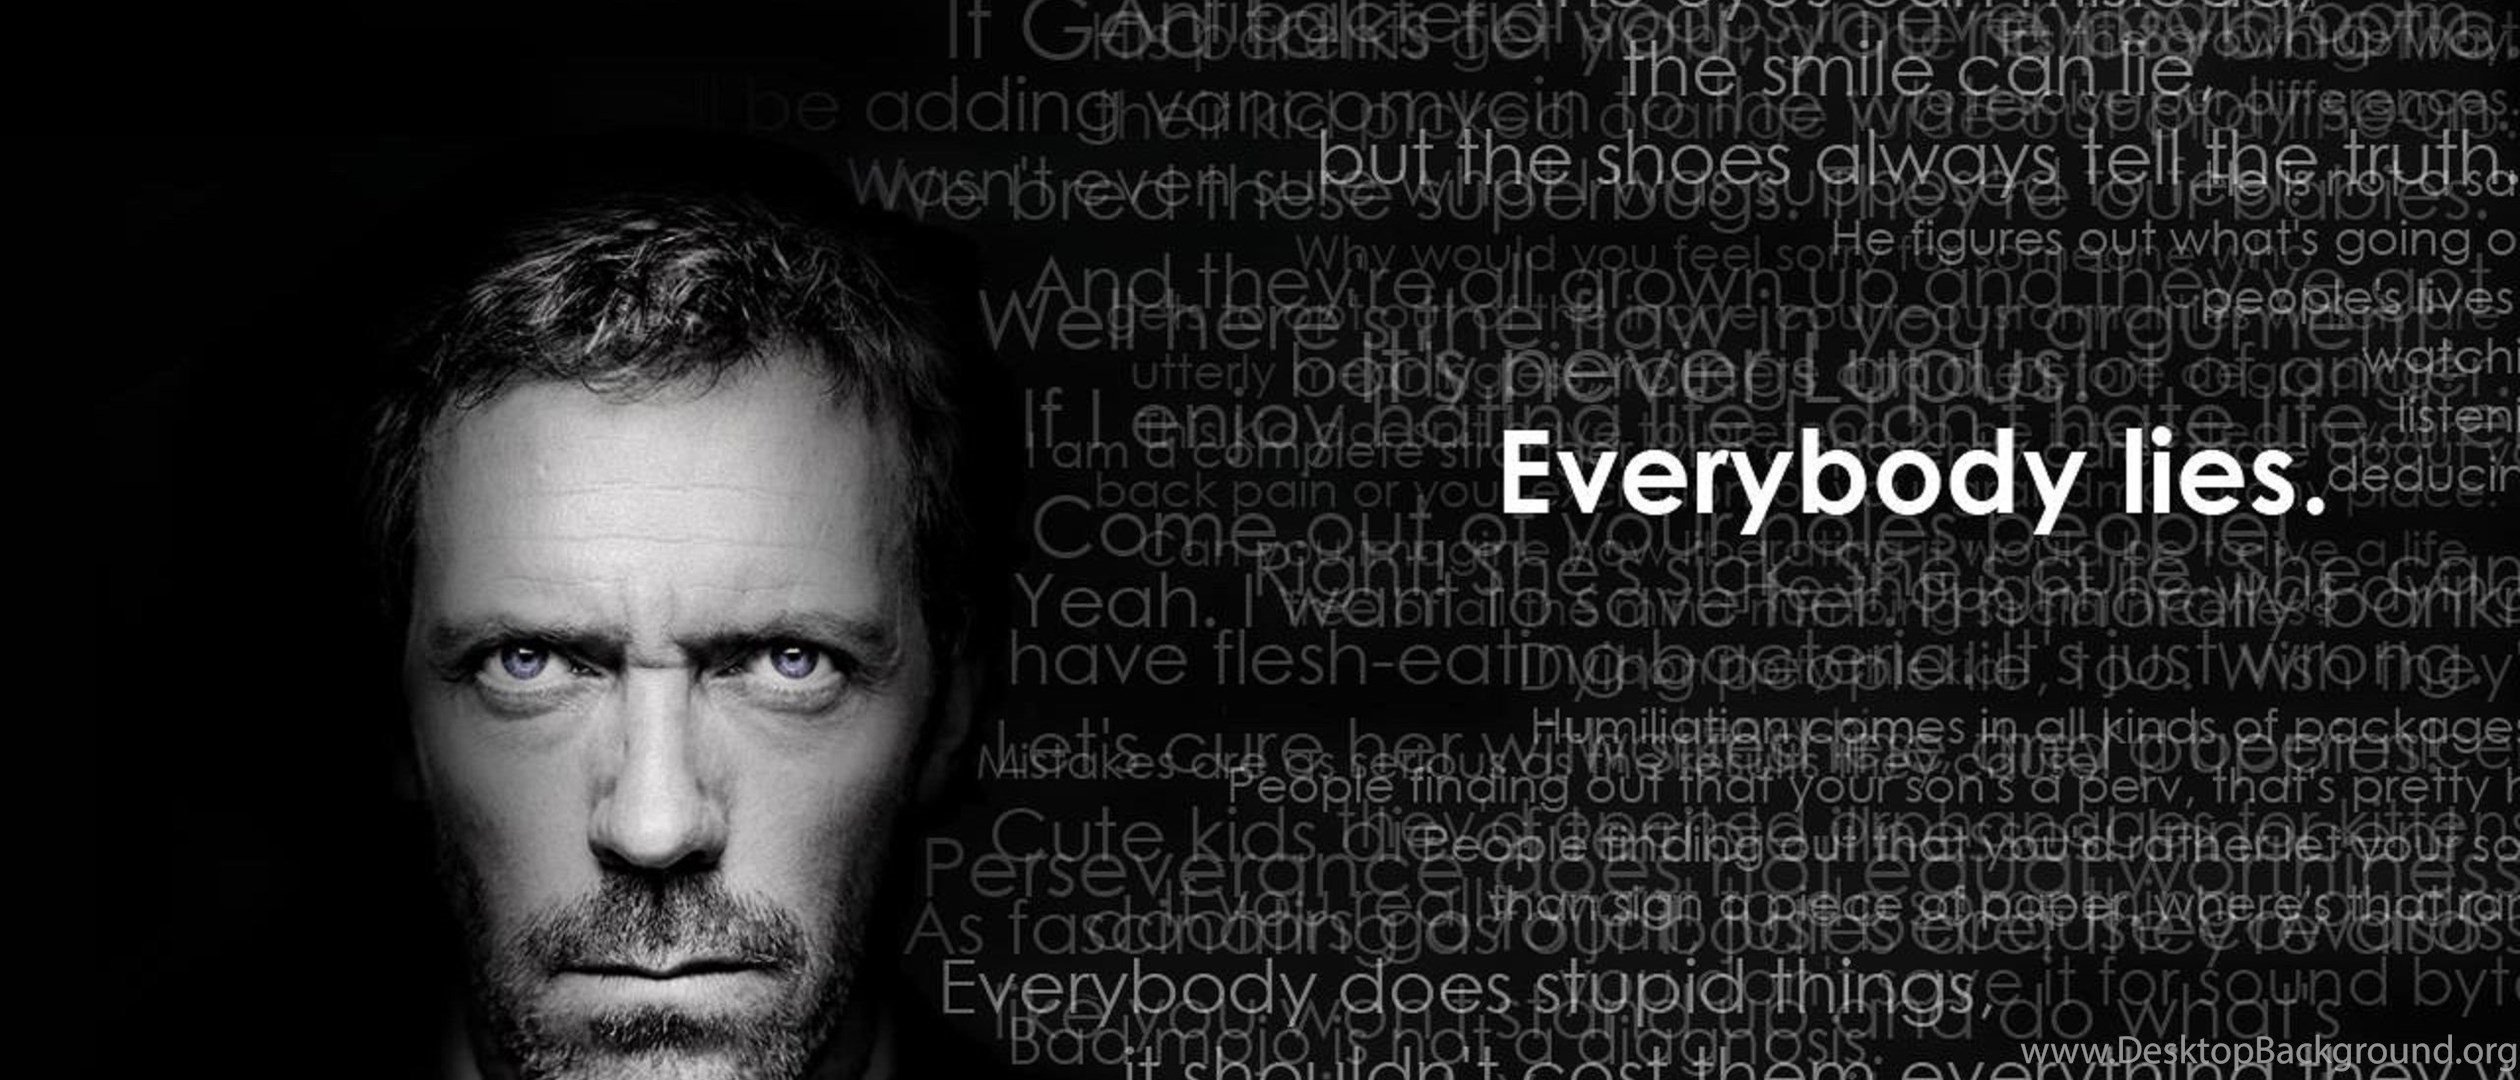 Everybody look for something. Everybody Lies. Dr House Everybody Lies. Everybody Lies House m.d. House MD Everybody Lies.